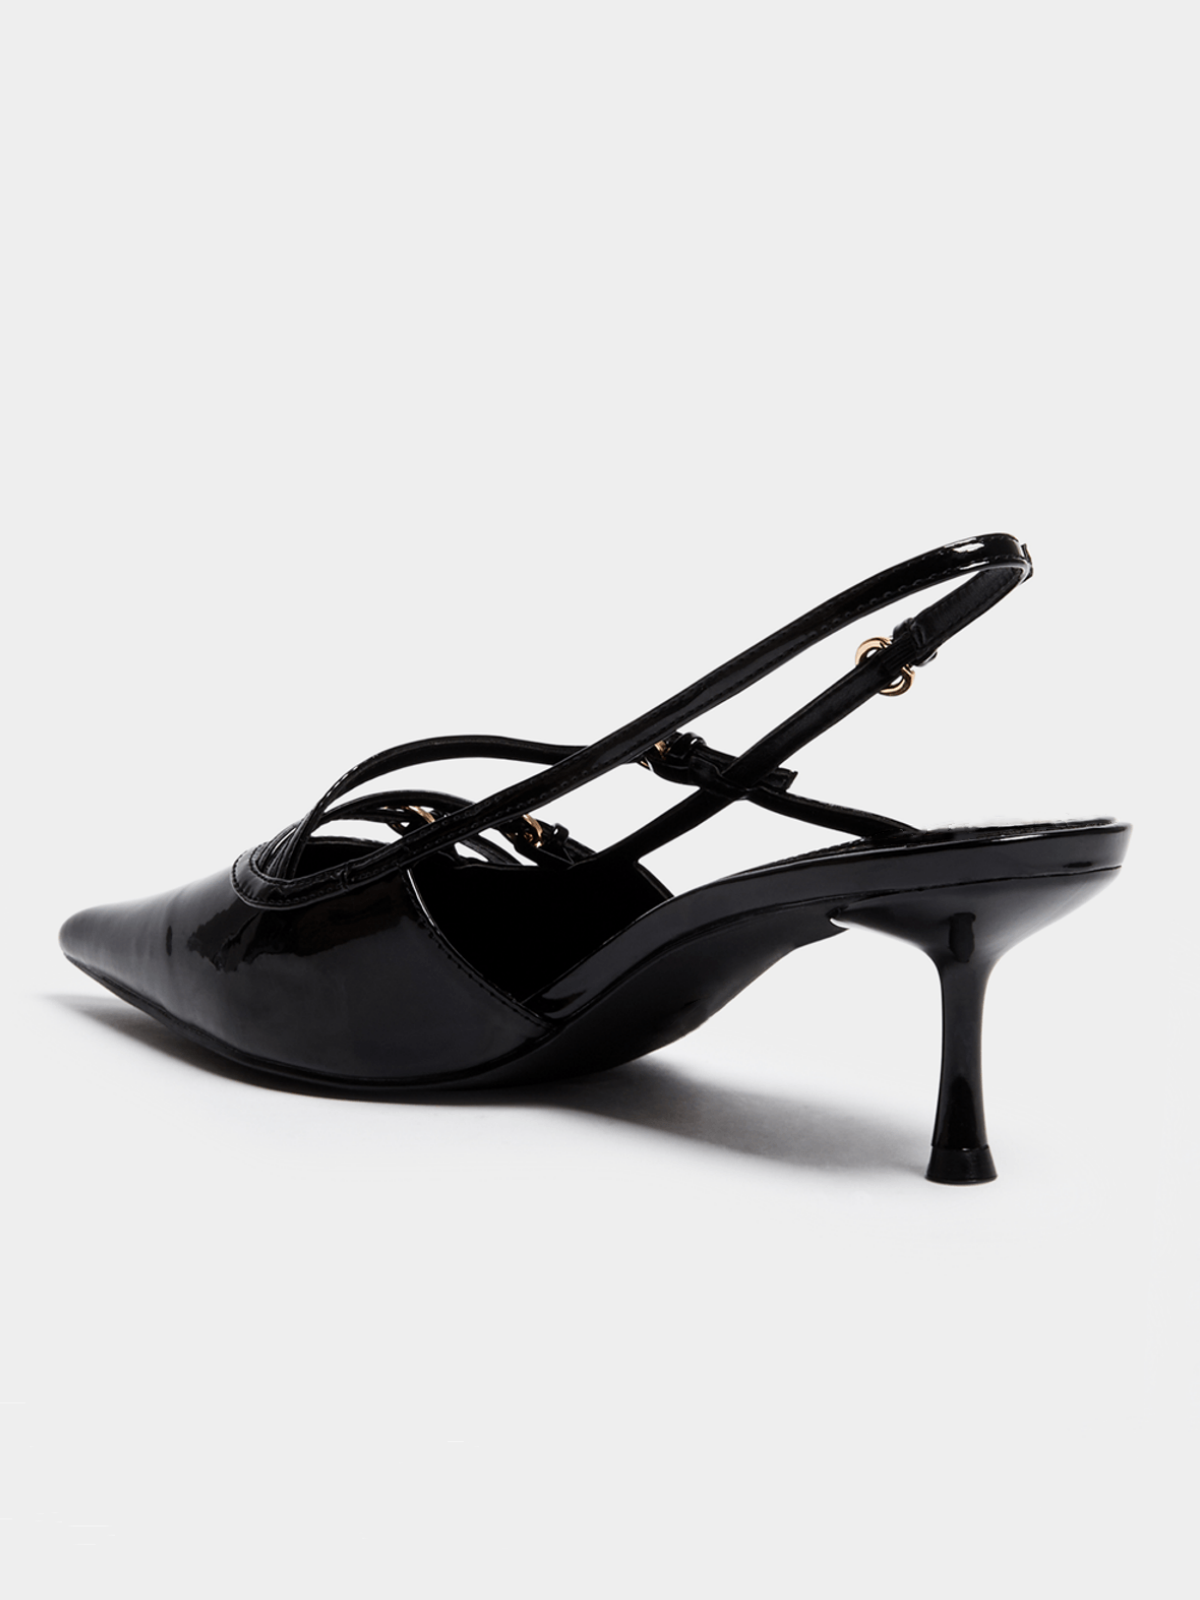 Black Patent Strappy Pointy Kitten Heels Slingback Courts Pumps